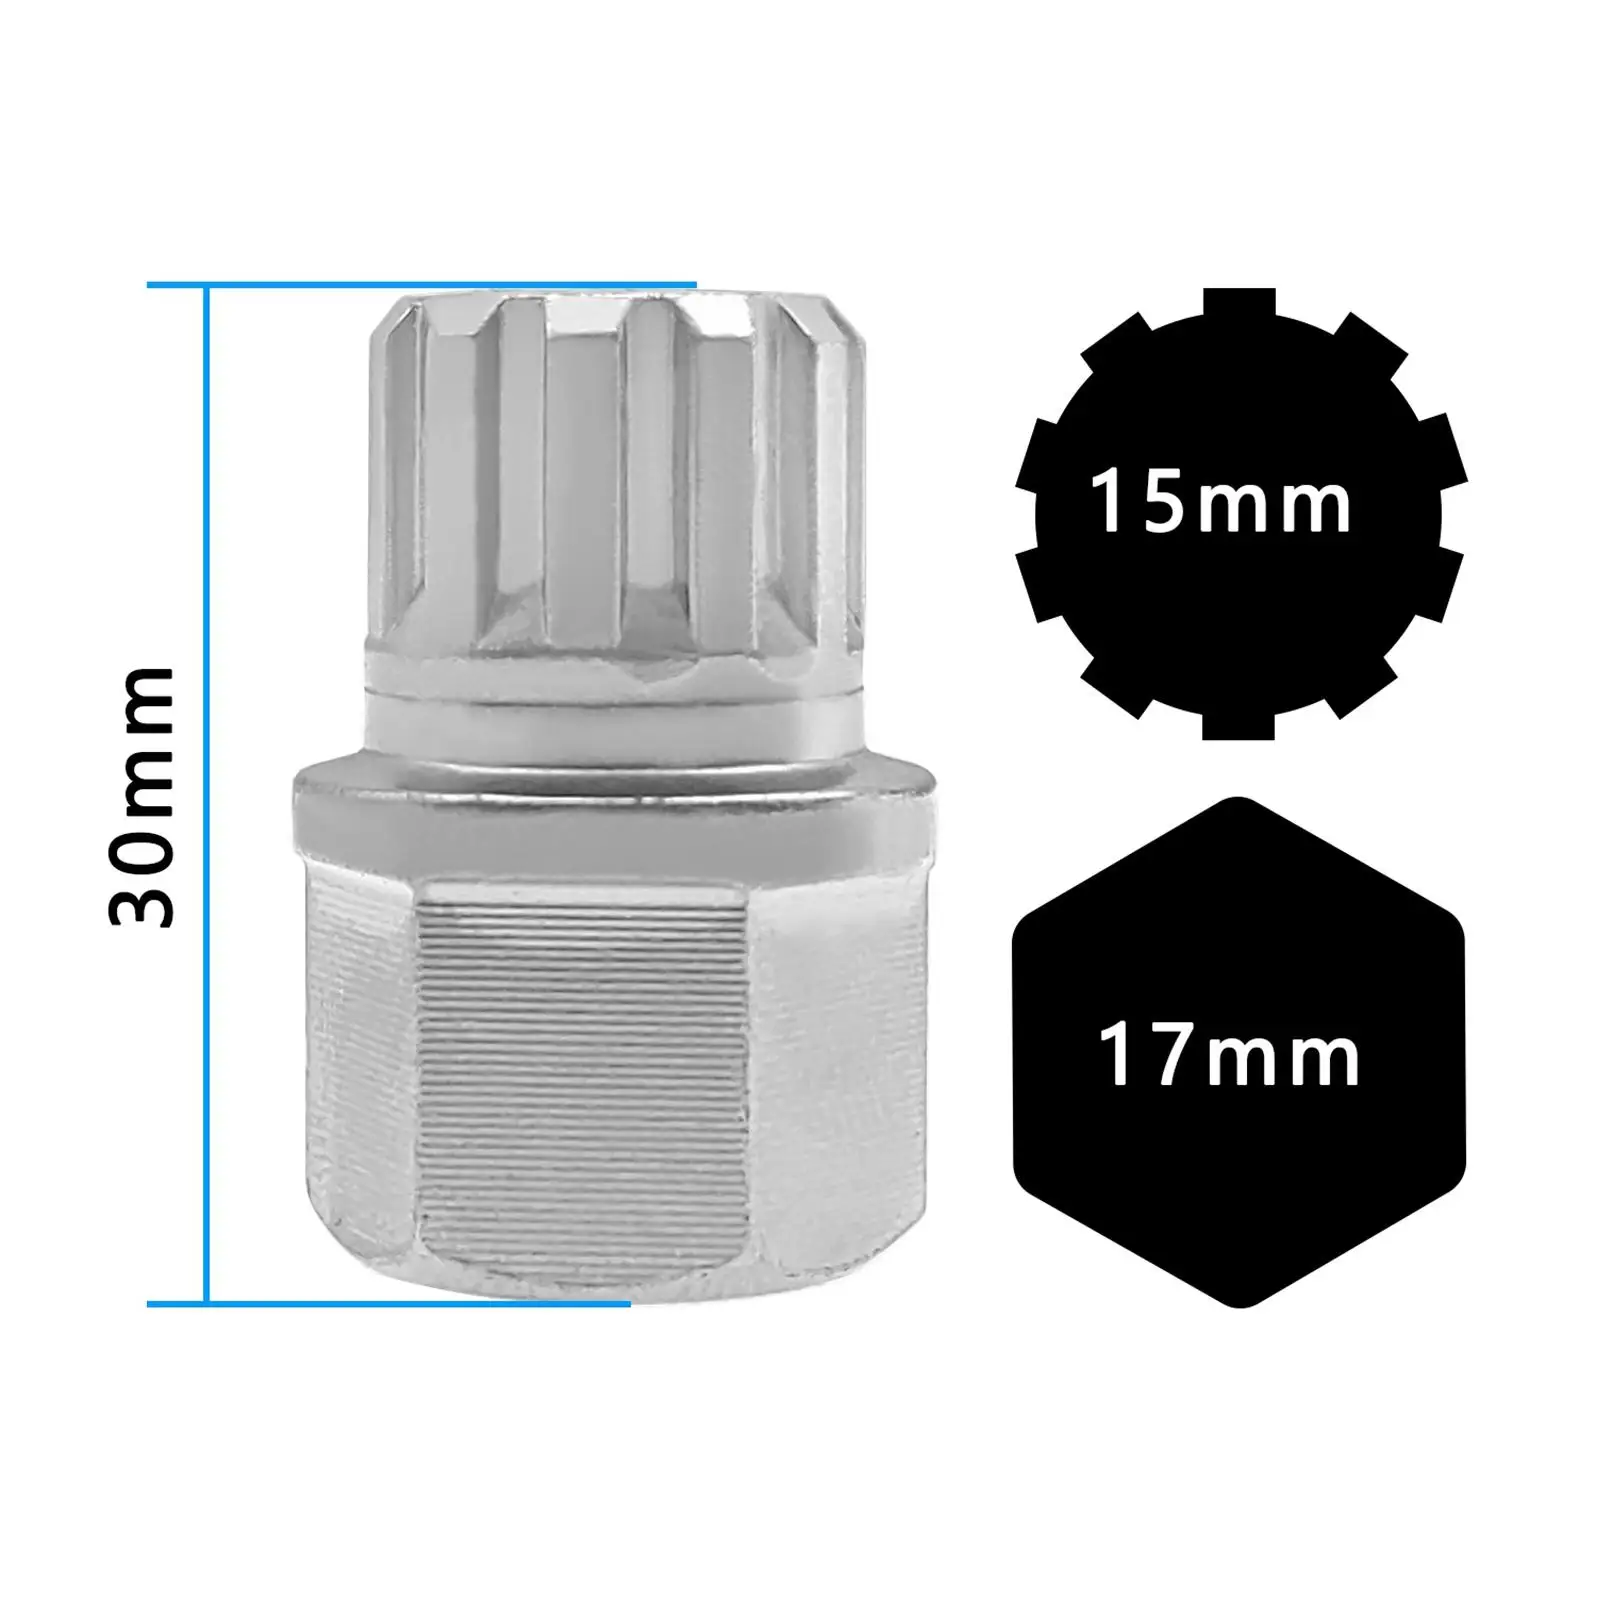 Wheel Locking Nut Key Steel Anti Thefts Screw Remover for Audi A3